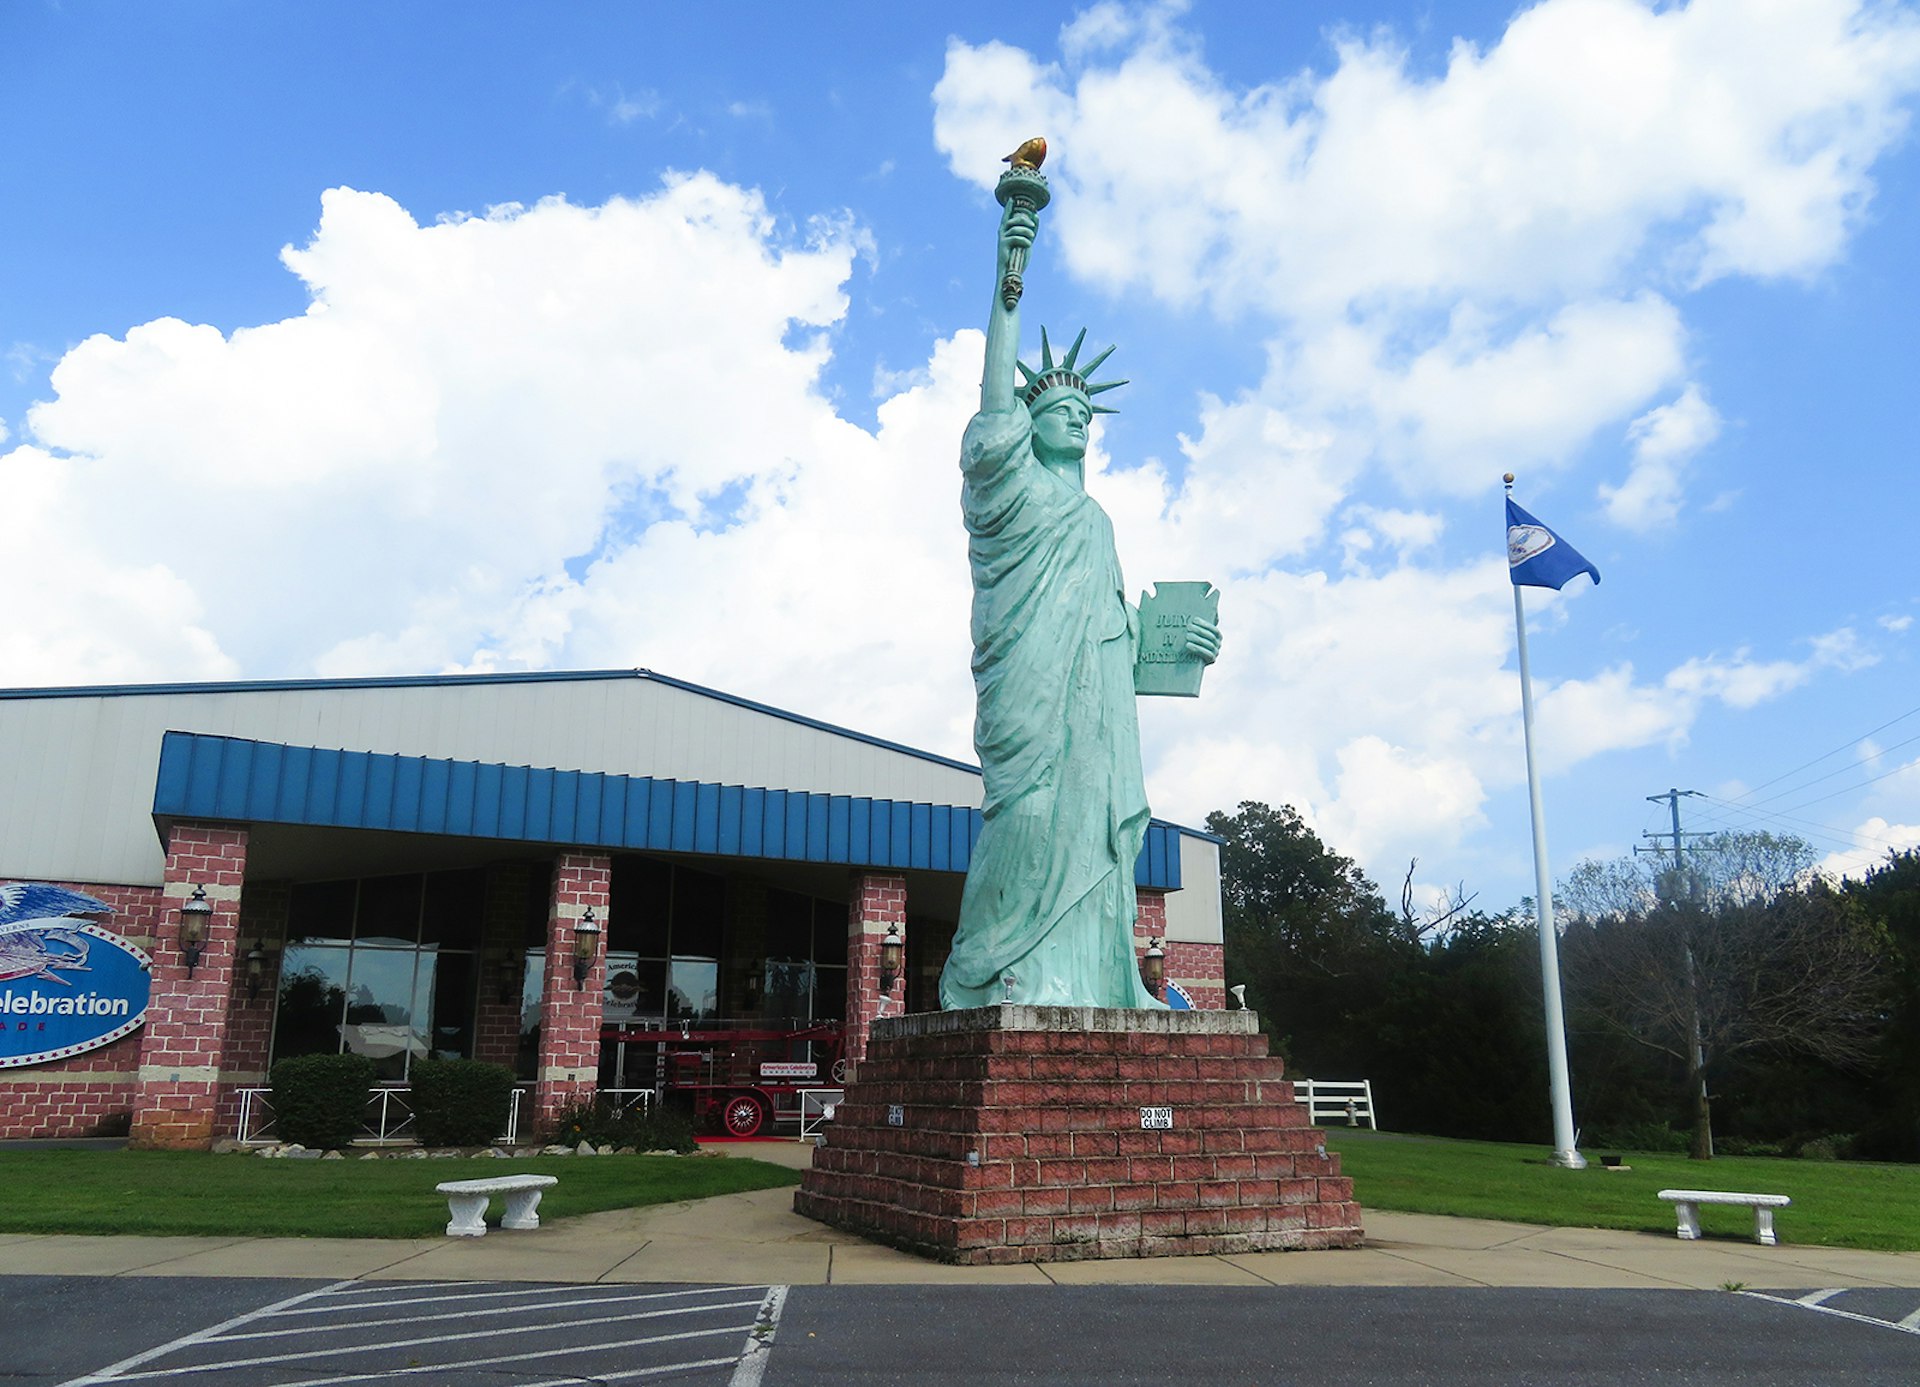 An approximately 30-foot replica of the statue of liberty sits outside the Americana Celebration museum on a sunny day